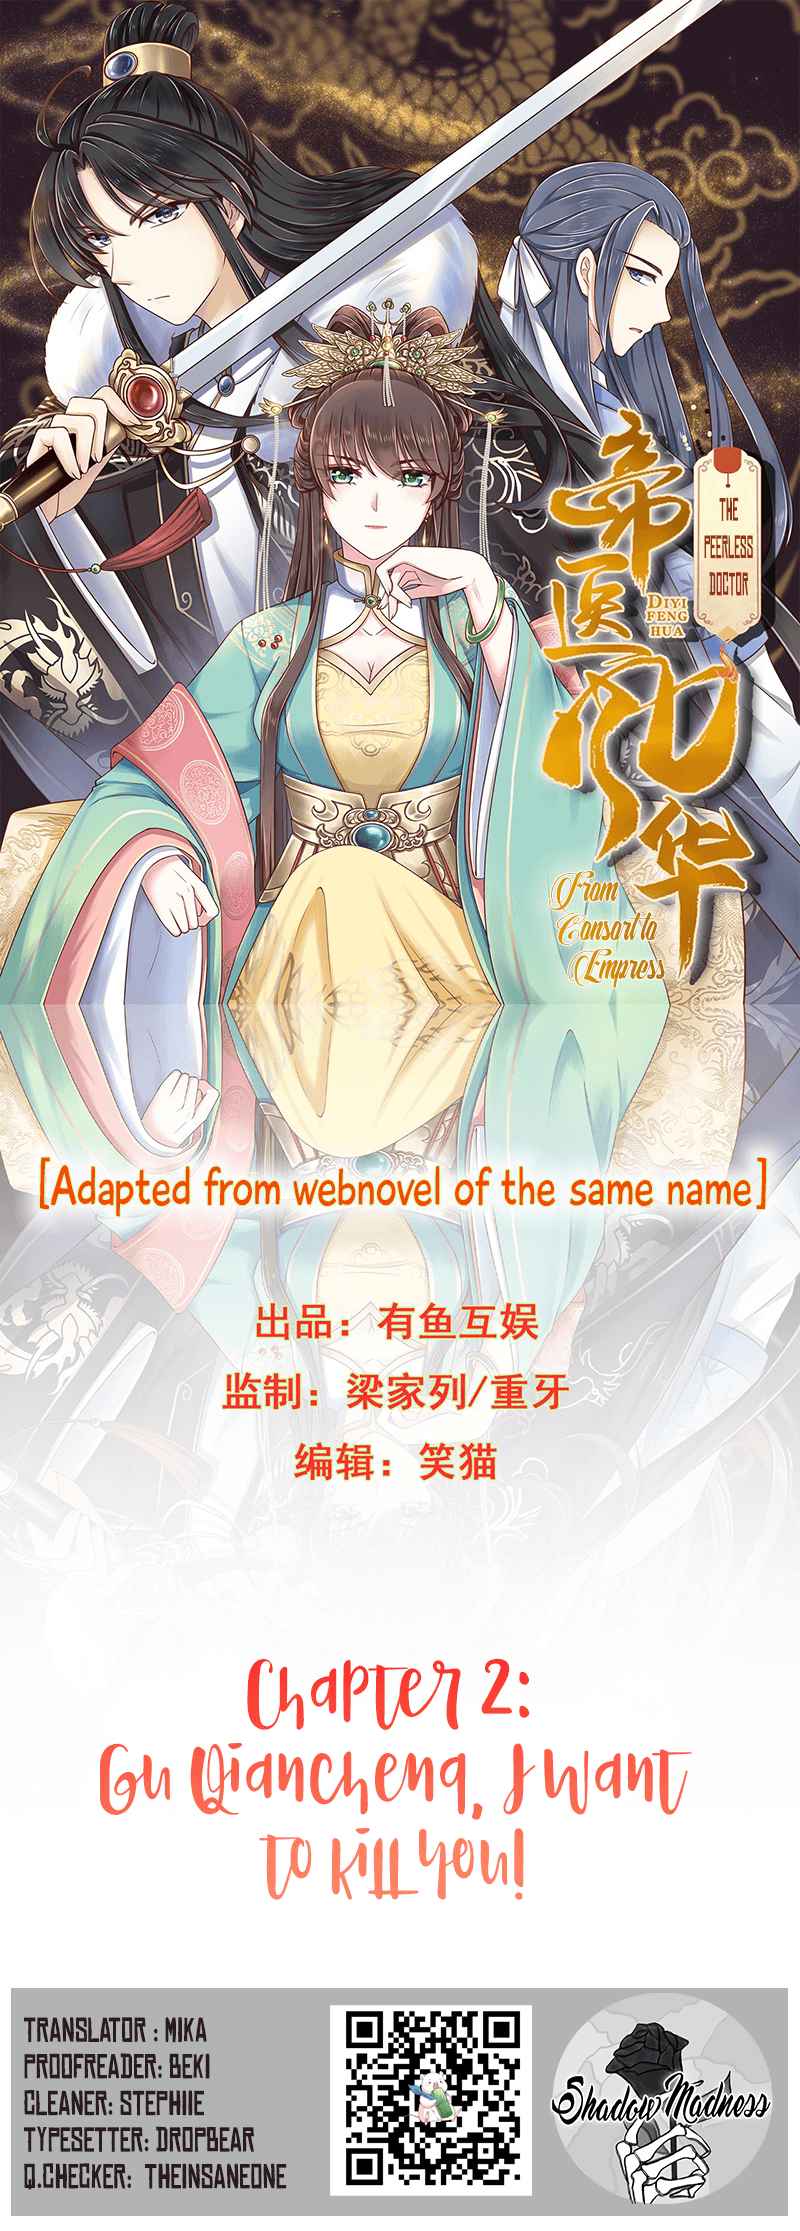 The Peerless Doctor: From Consort to Empress Ch. 2 Gu Qiancheng, I want to kill you!